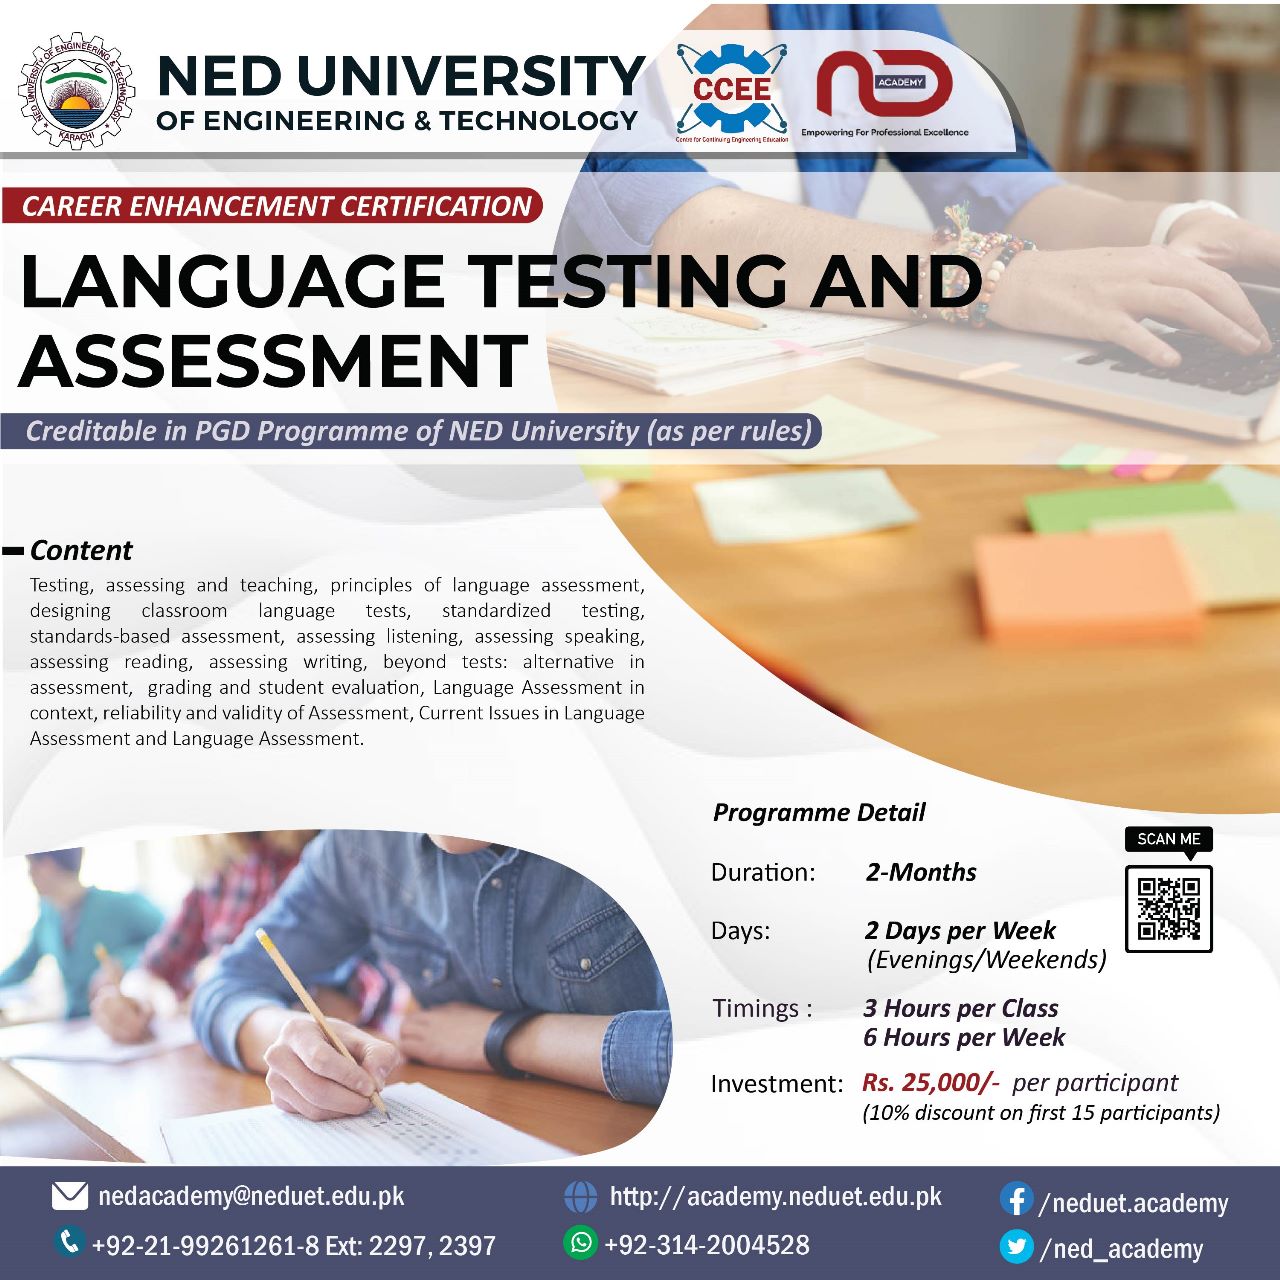 language testing and assessment